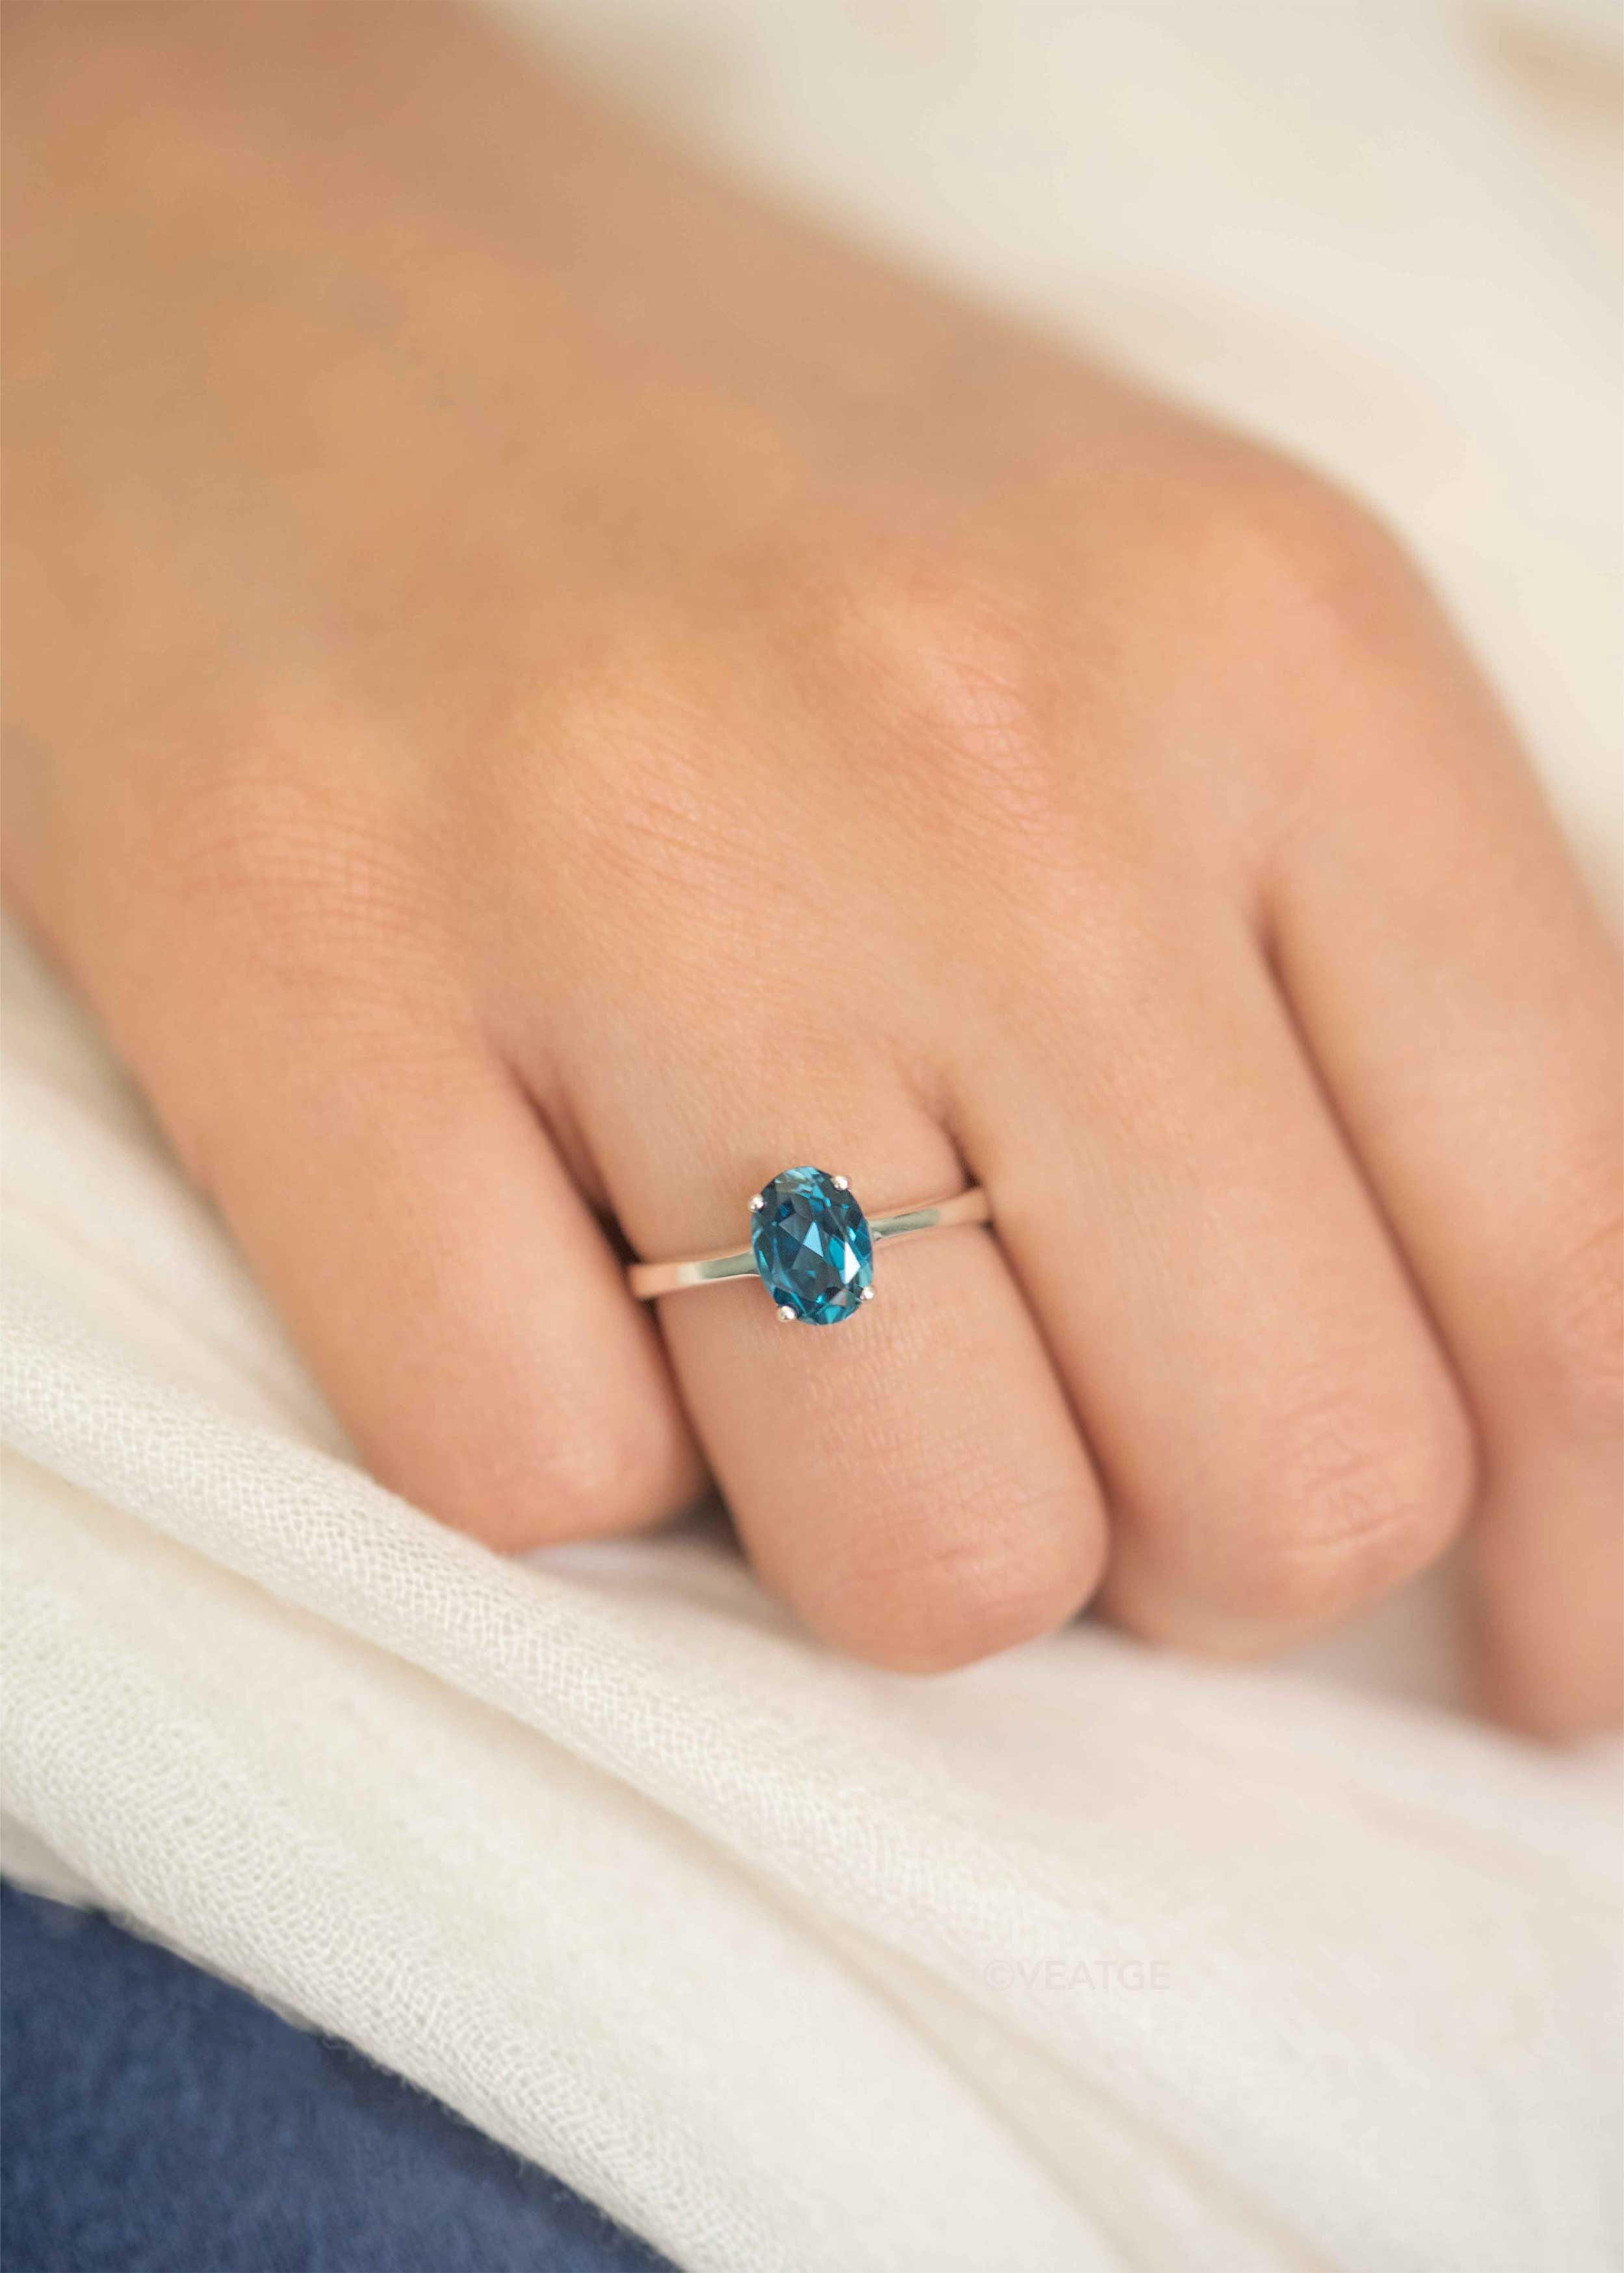 Luxe London Blue Topaz & White Topaz Ring – local eclectic